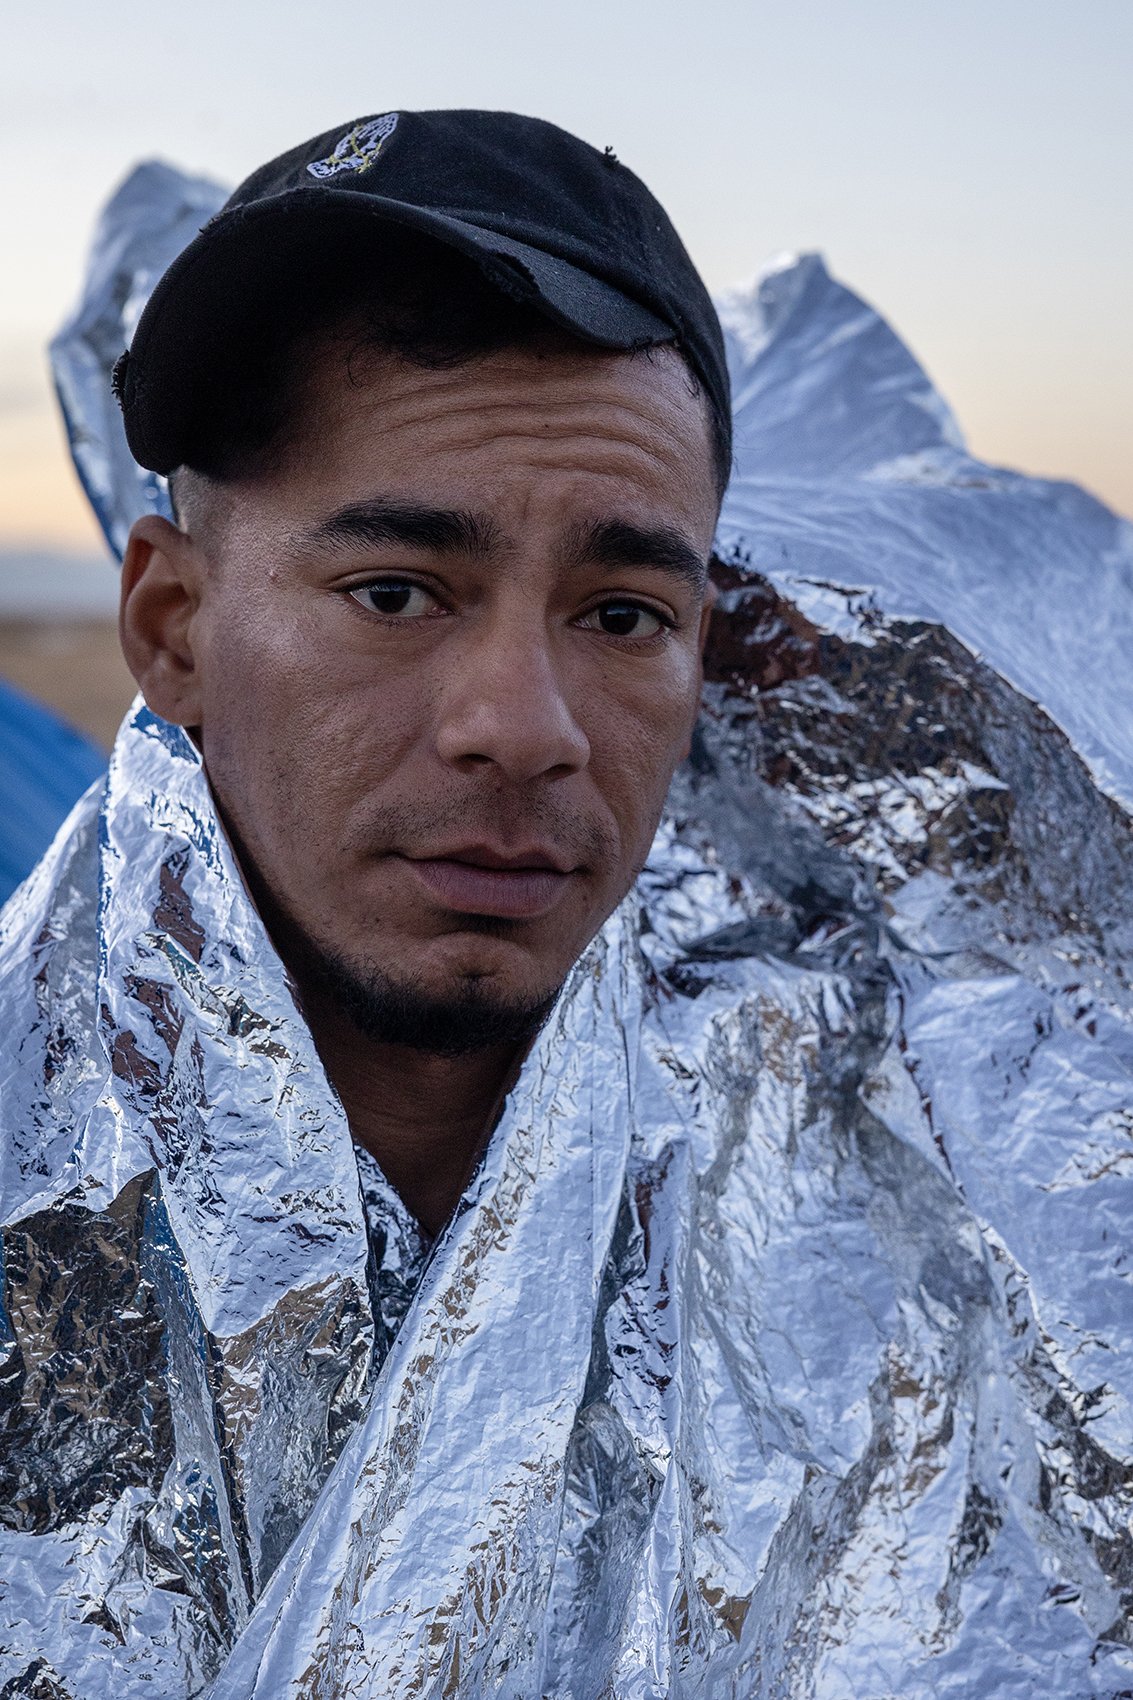  New migrants feel a mix of exhaustion and hope as they end up living on the streets. Credit: Giles Clasen 